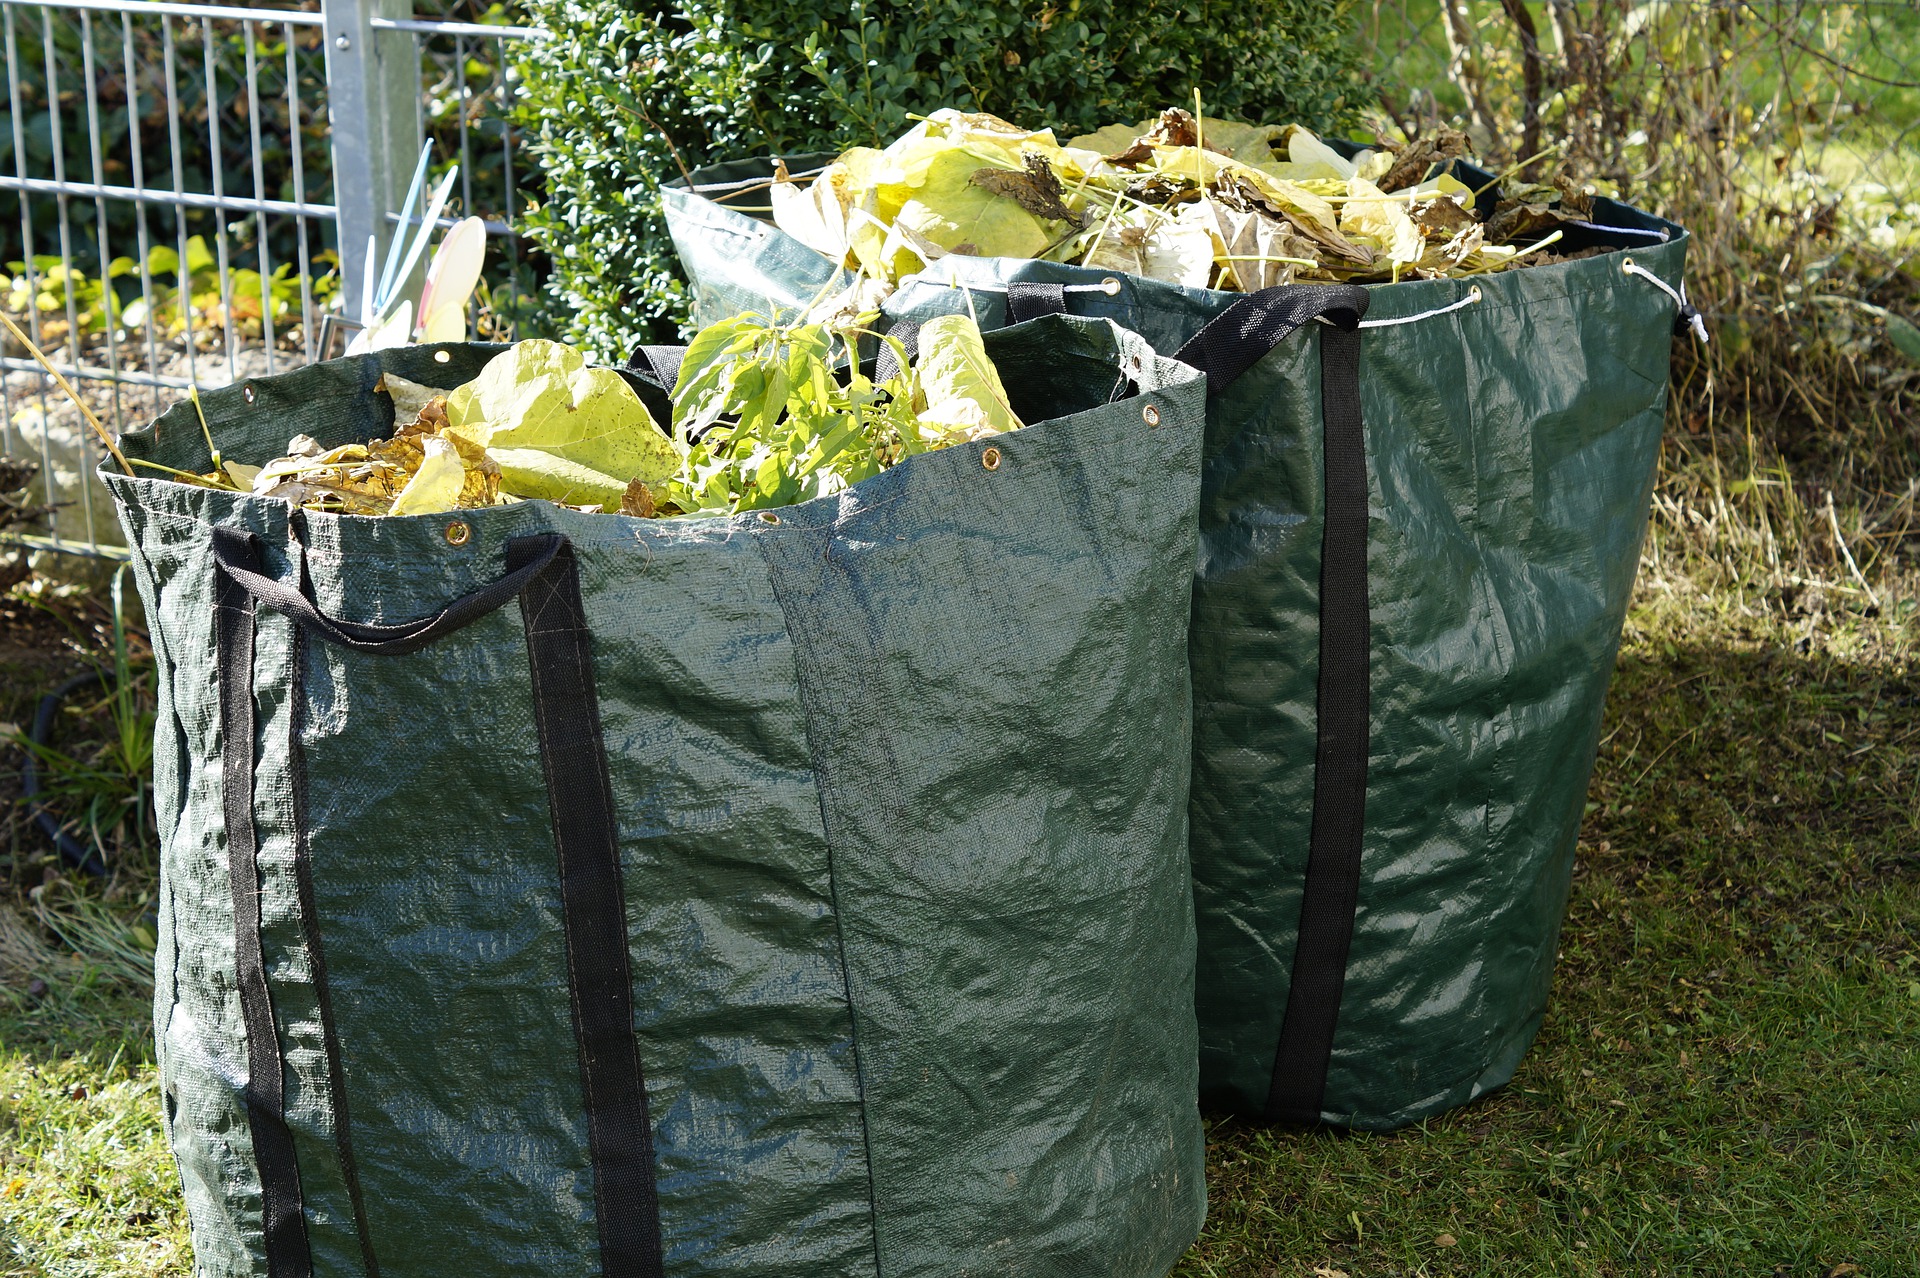 Bags of garden waste after clearing up